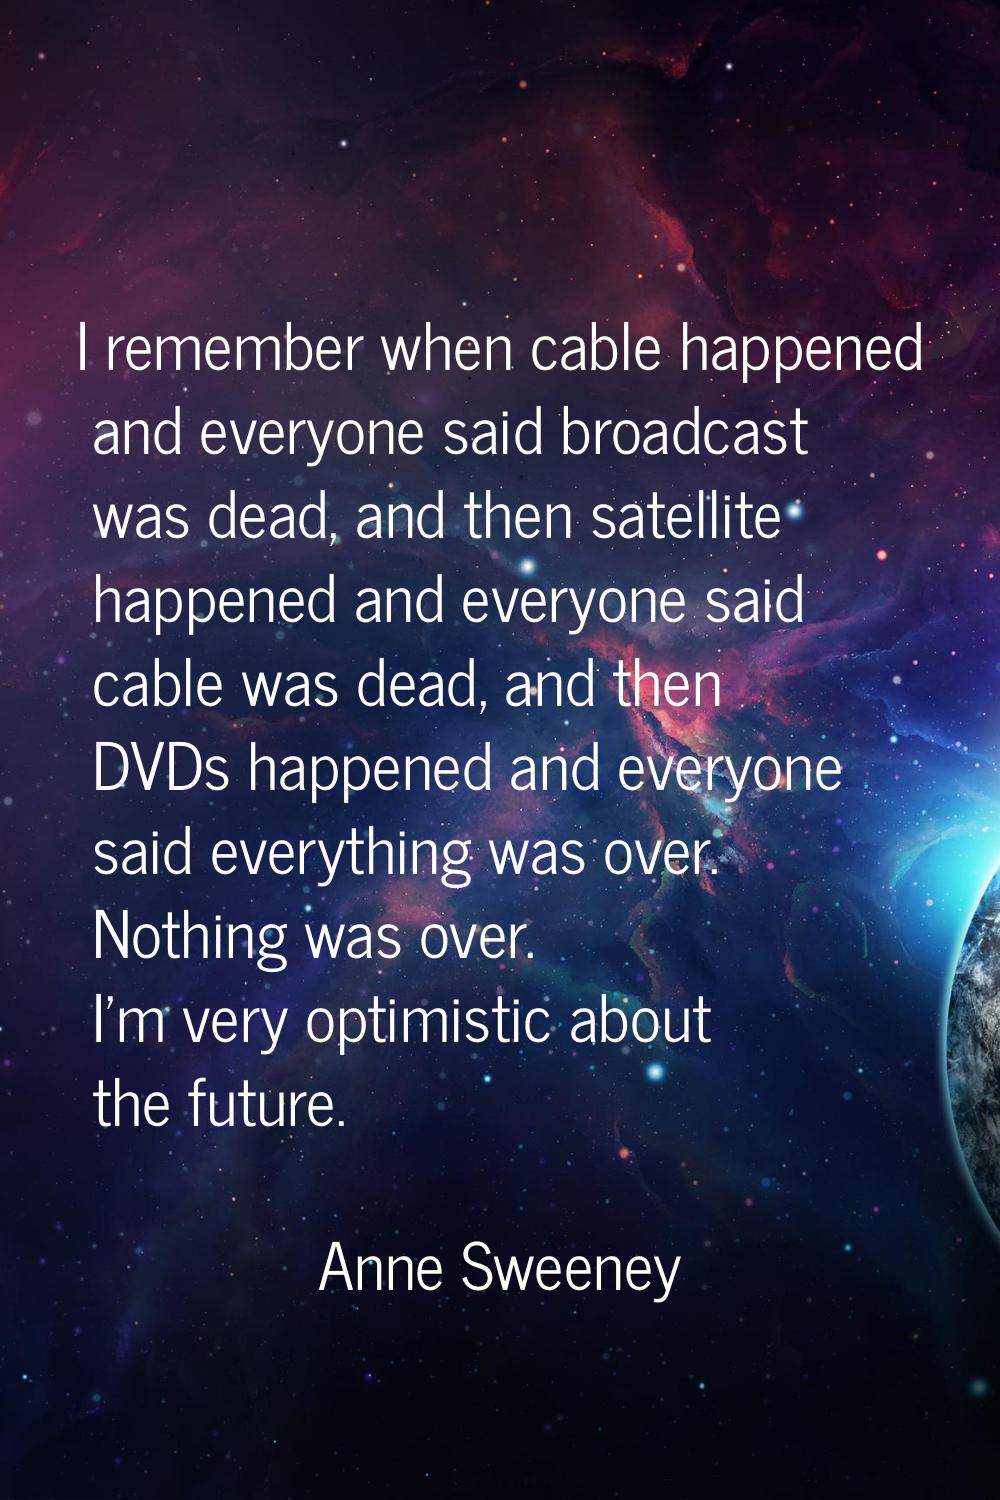 I remember when cable happened and everyone said broadcast was dead, and then satellite happened an